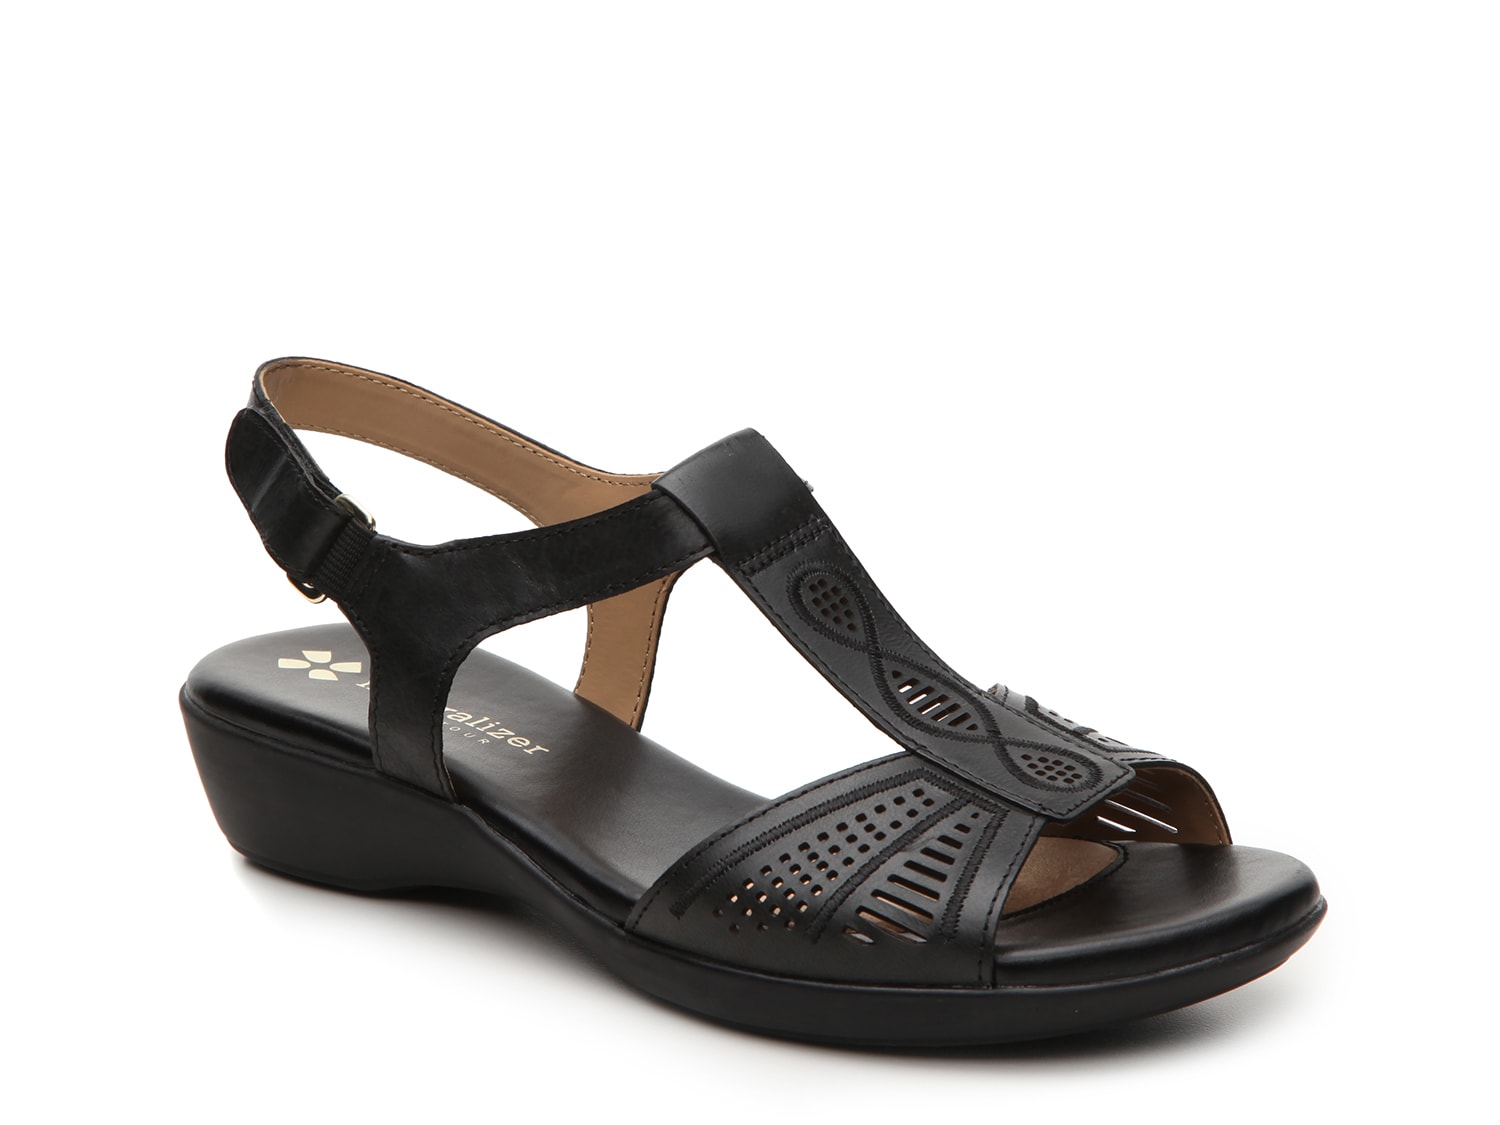 Naturalizer Network Wedge Sandal - Free Shipping | DSW